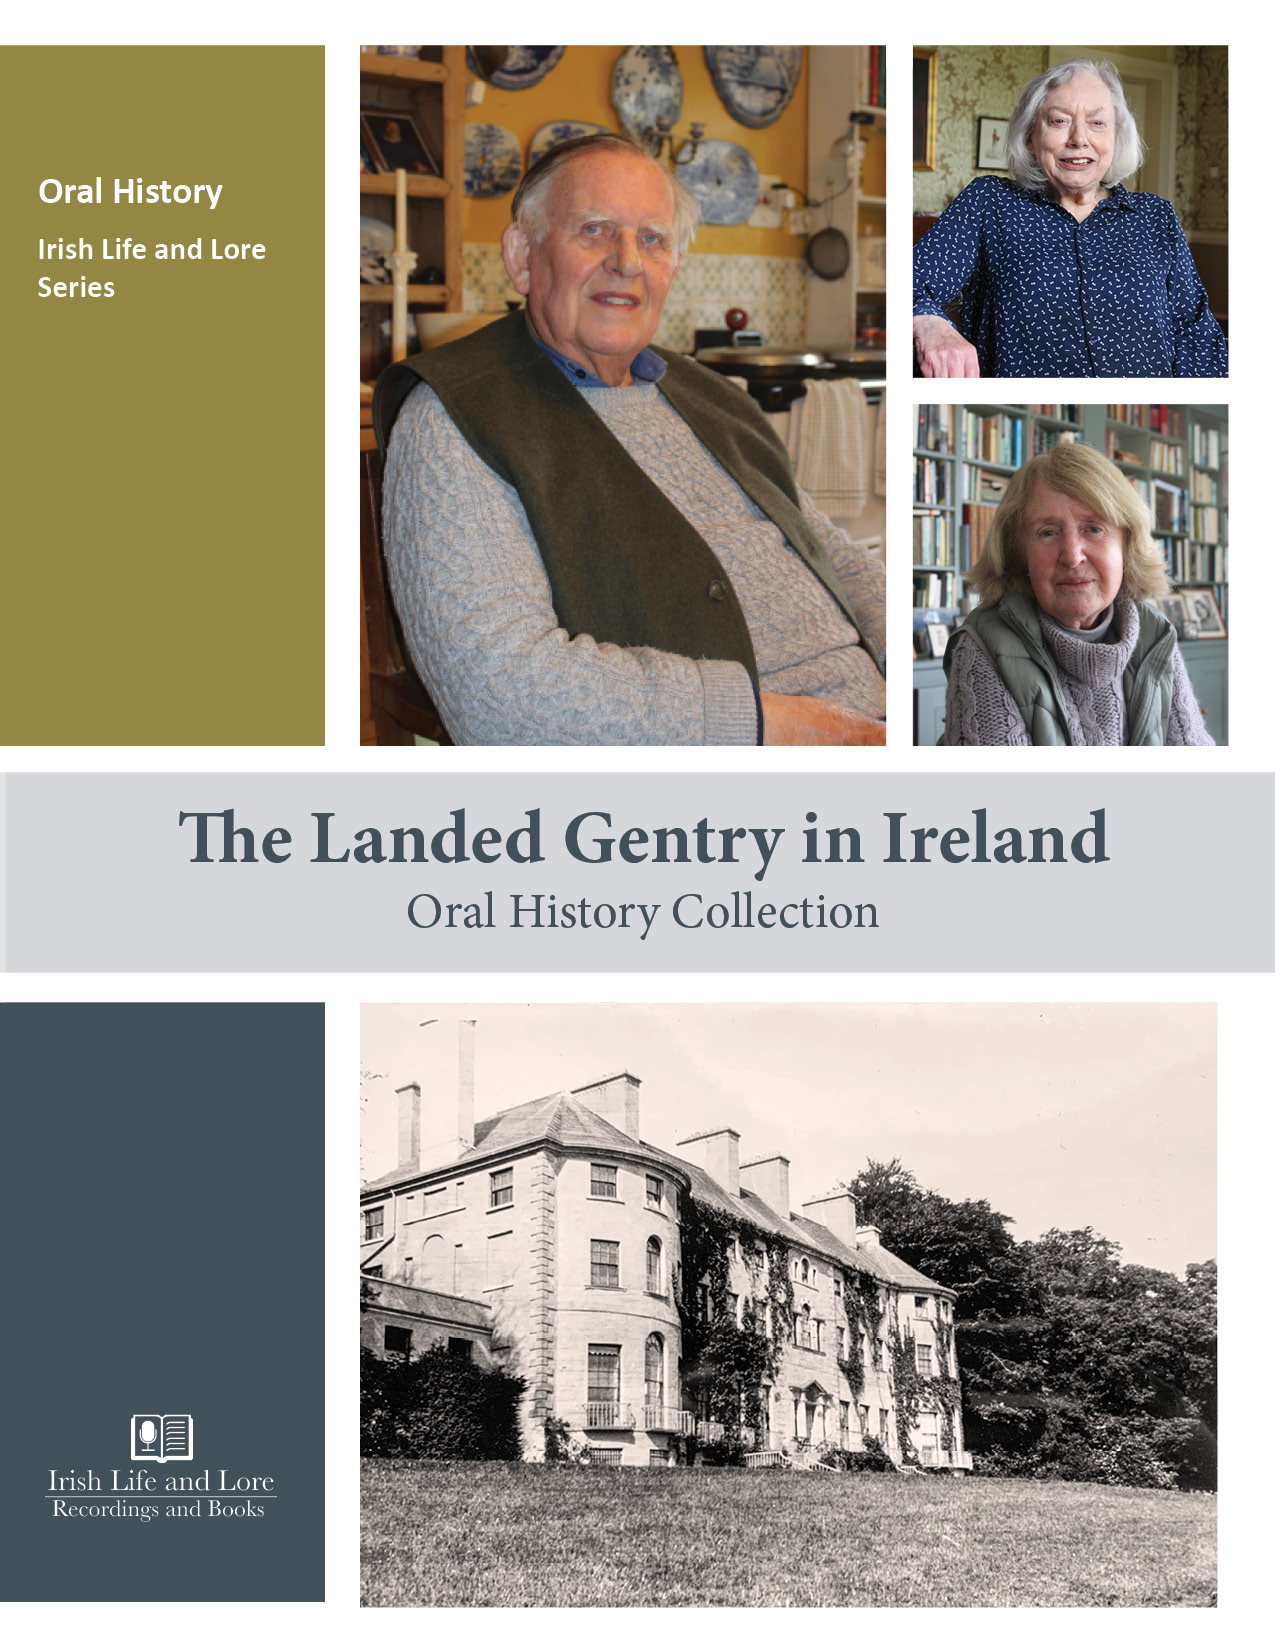 The Landed Gentry in Ireland